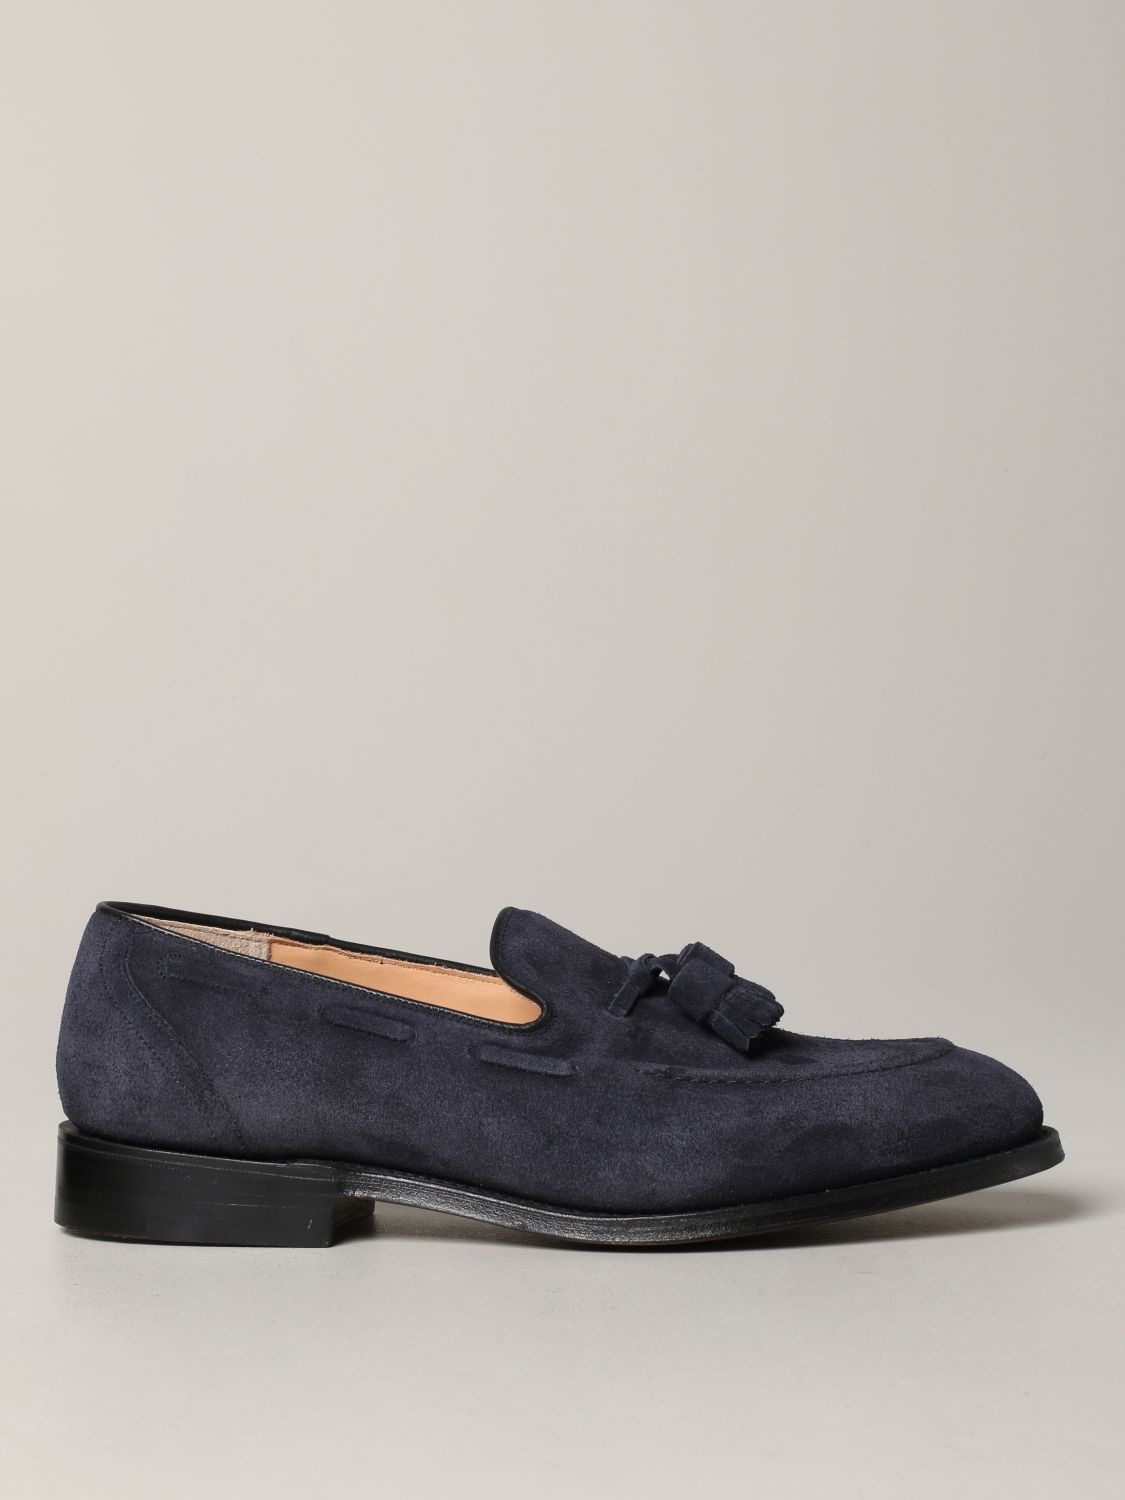 church's suede loafers